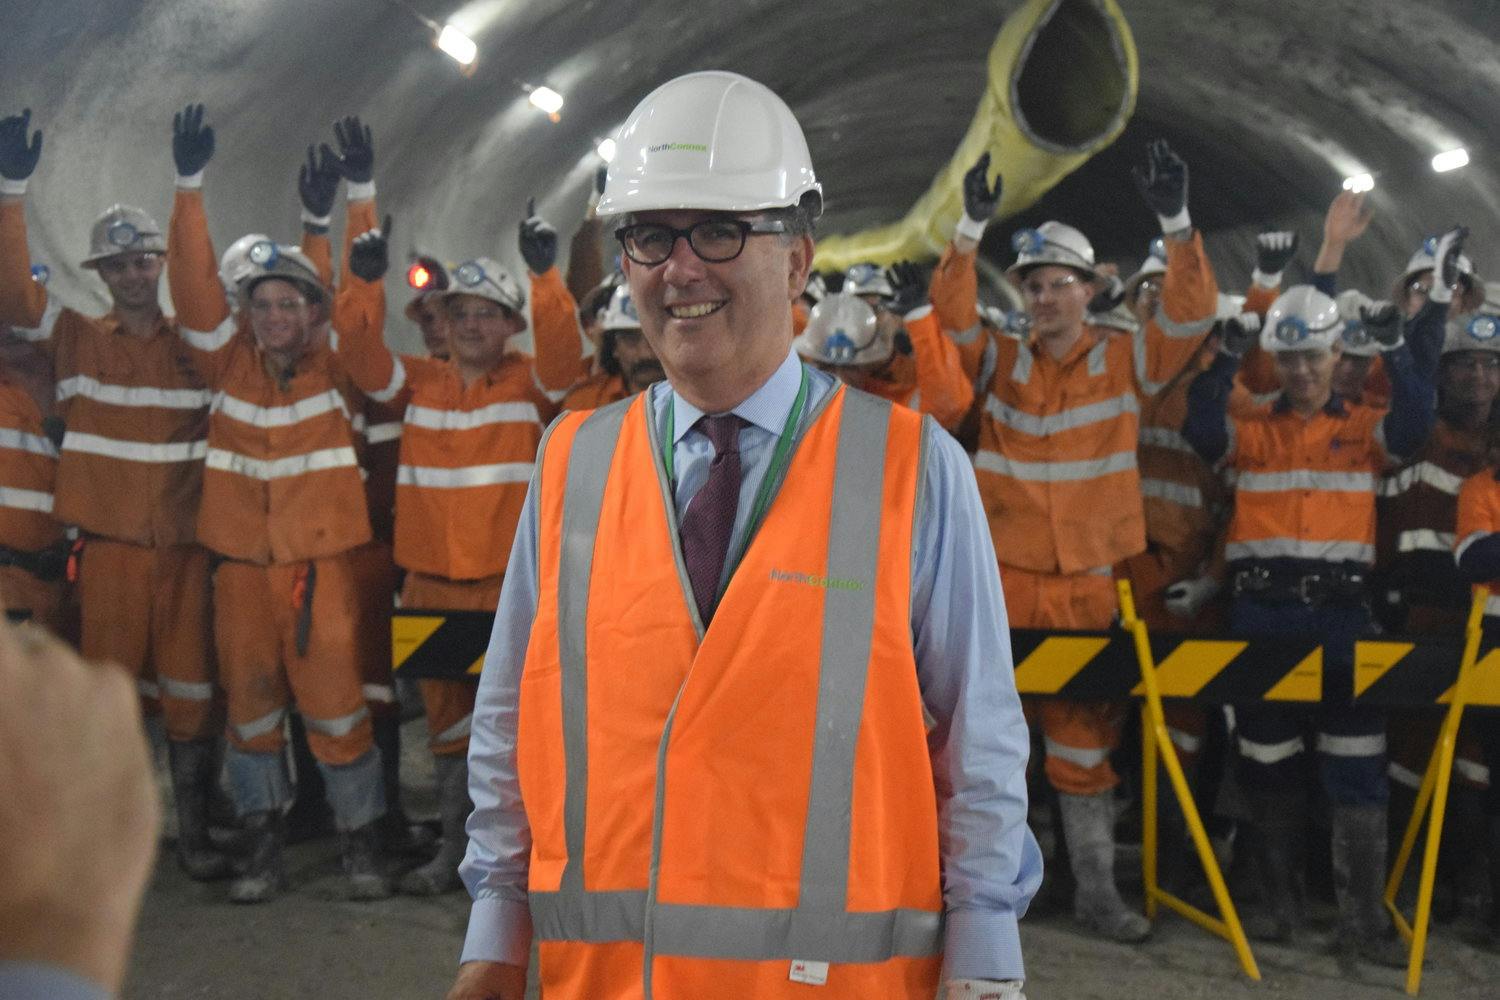 Alister inside NorthConnex Tunnel 